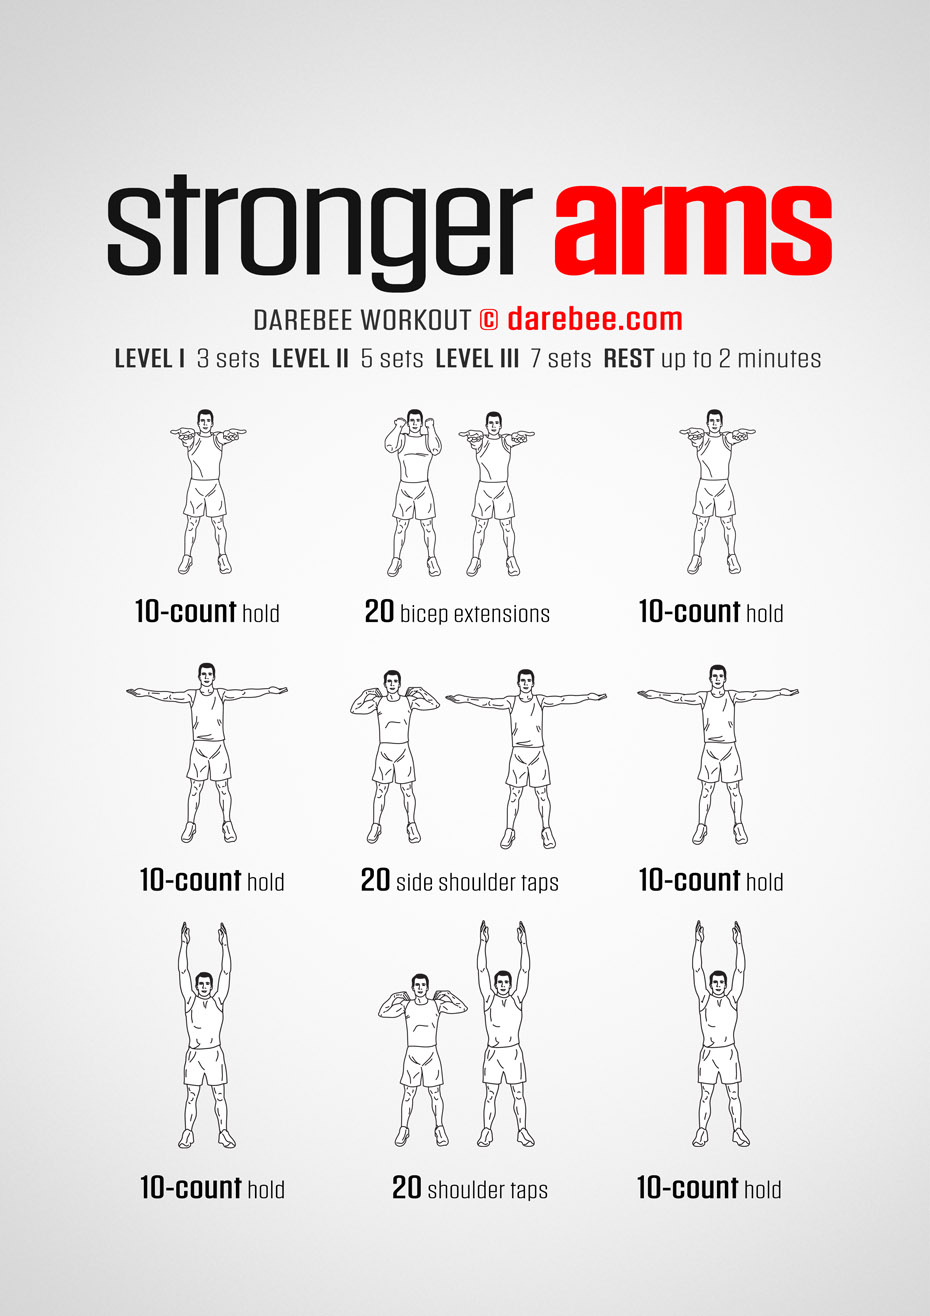 6 exercises to tone your arms! 💪🏽 Day 4: Arms